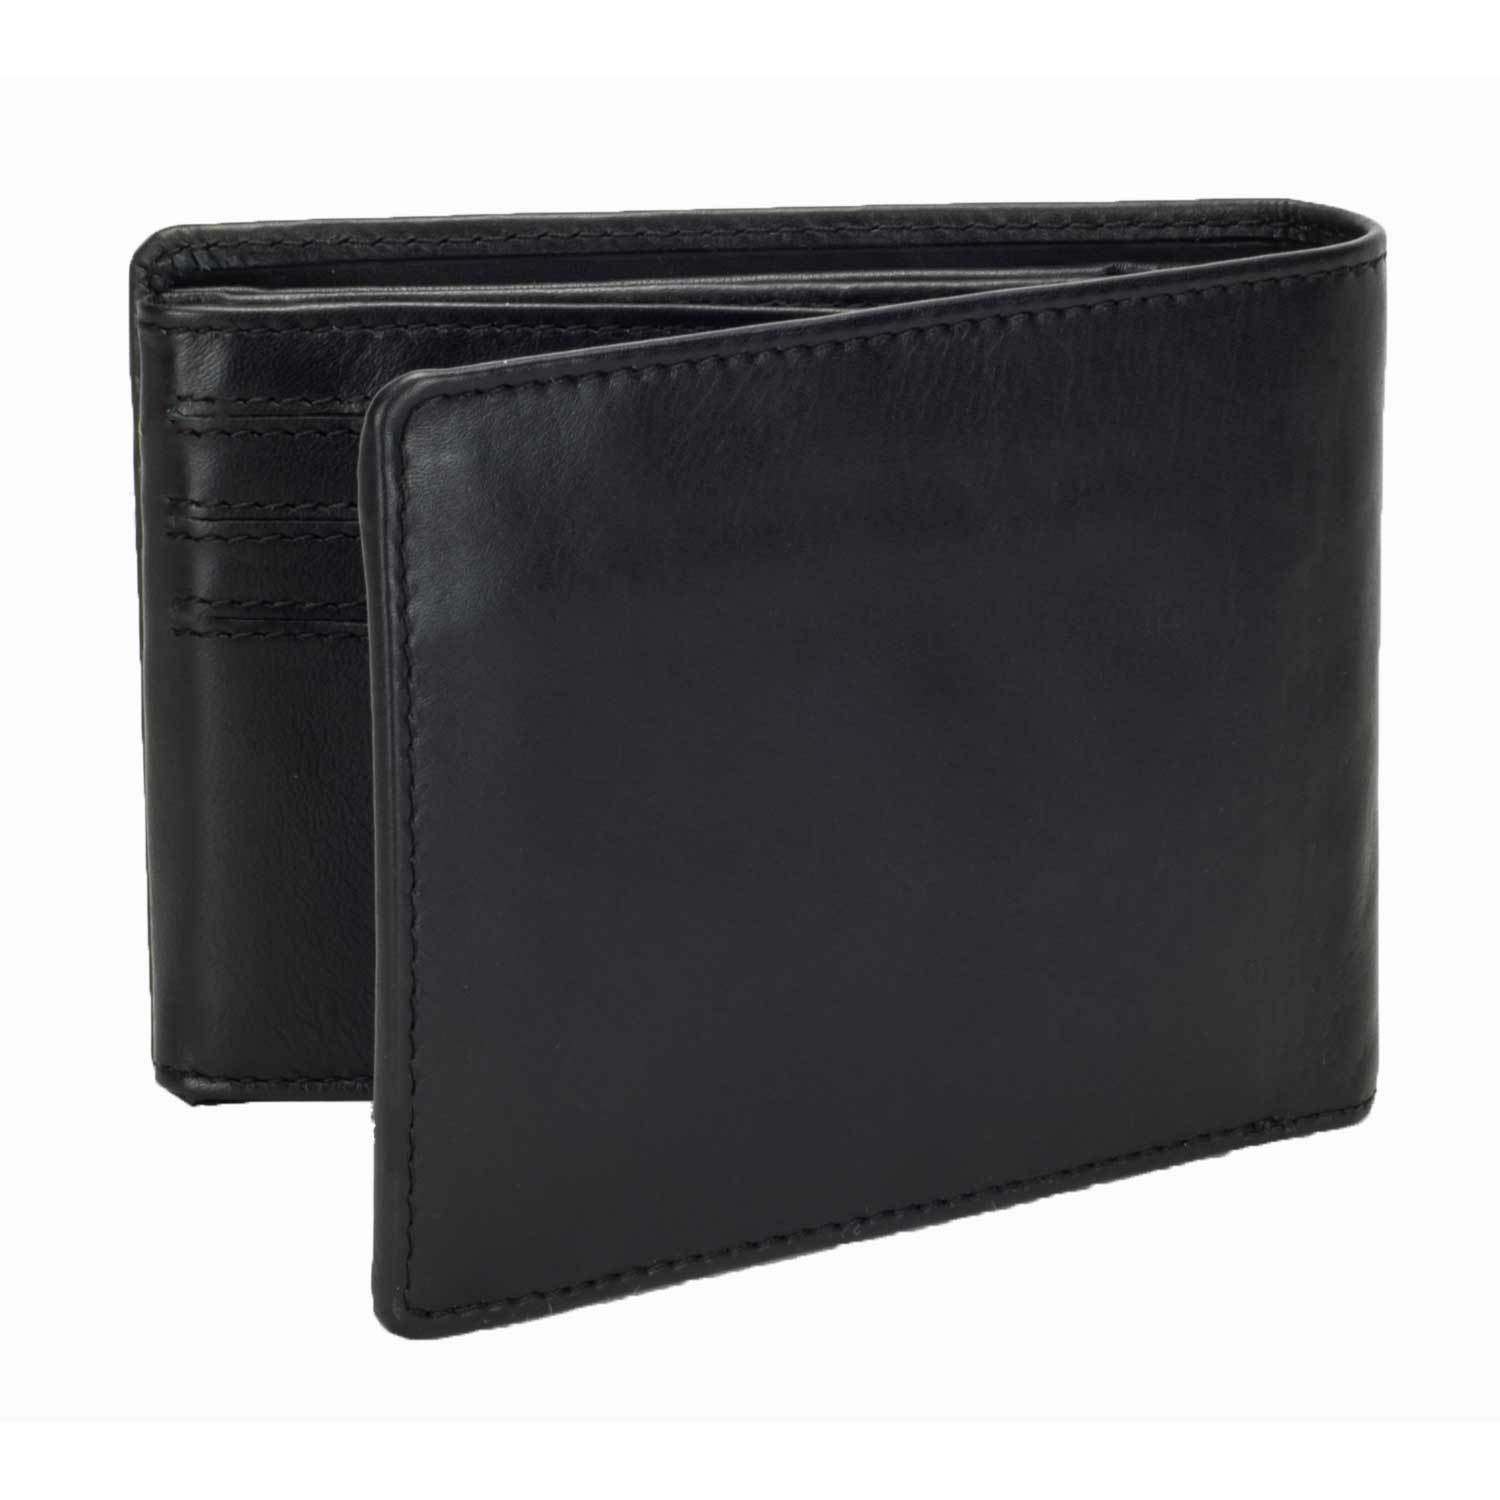 DiLoro Men's Leather Bifold Flip ID Zip Coin Wallet with RFID Protection in Black. Full grain nappa leather - best quality leather! Back, side view